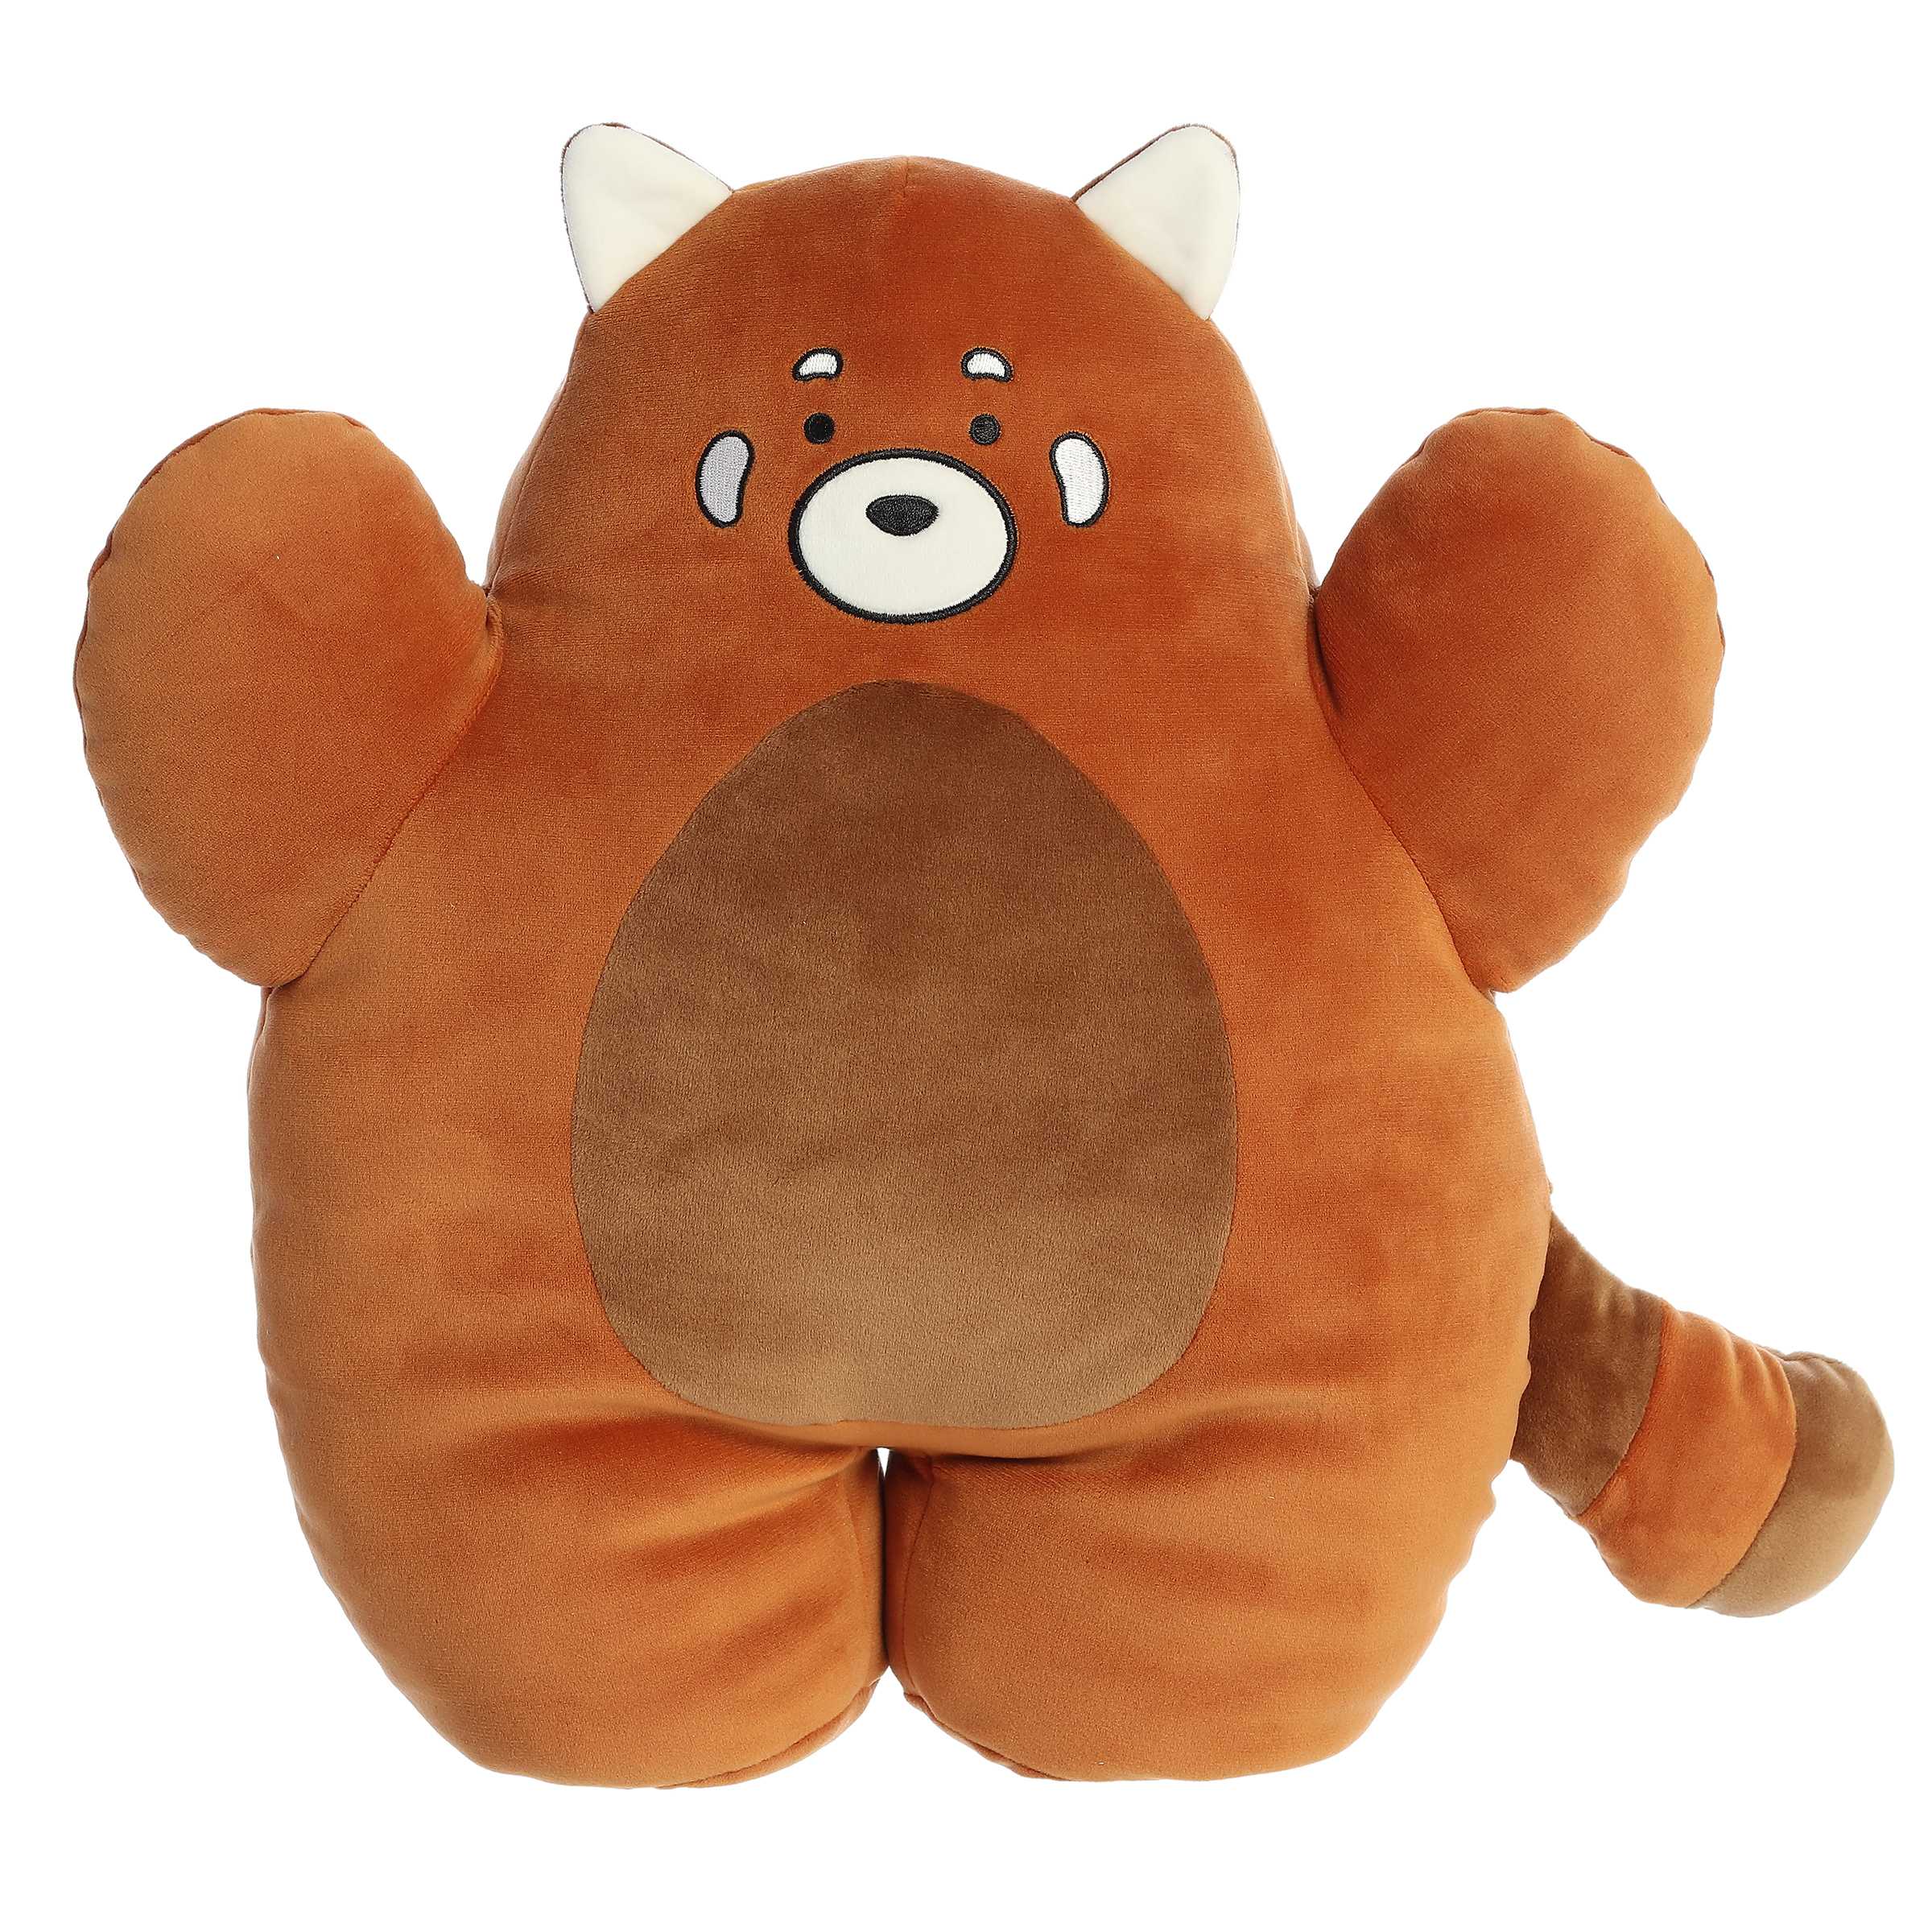 Cuddly soft panda plush toy with red-orange body, white accents on ears and face, and brown designs on tail and at the center